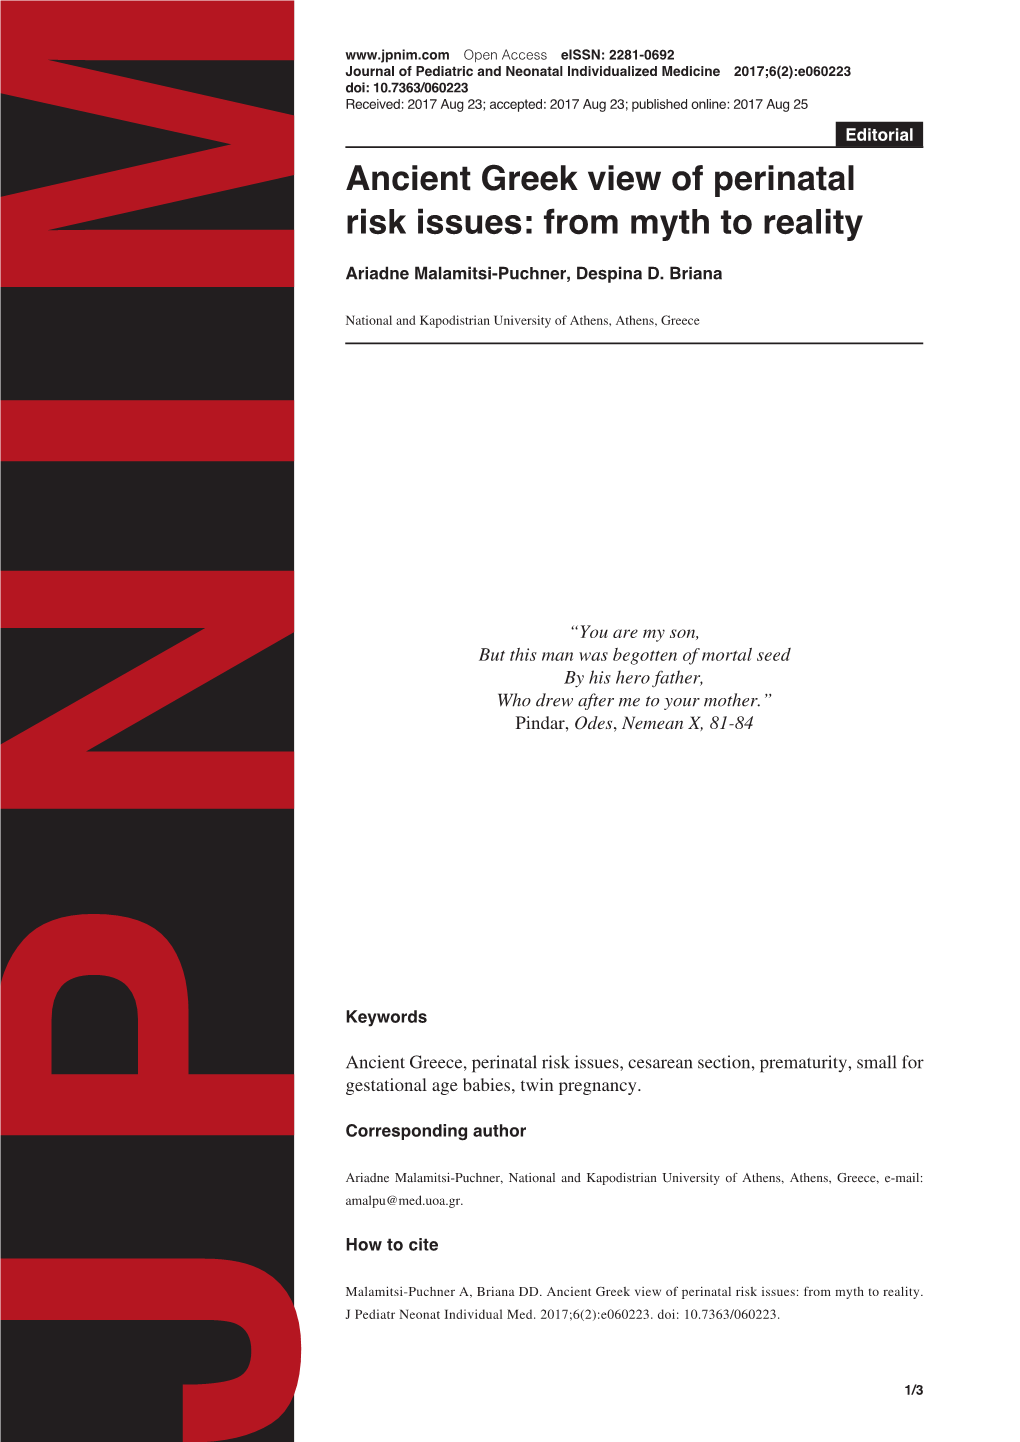 Ancient Greek View of Perinatal Risk Issues: from Myth to Reality